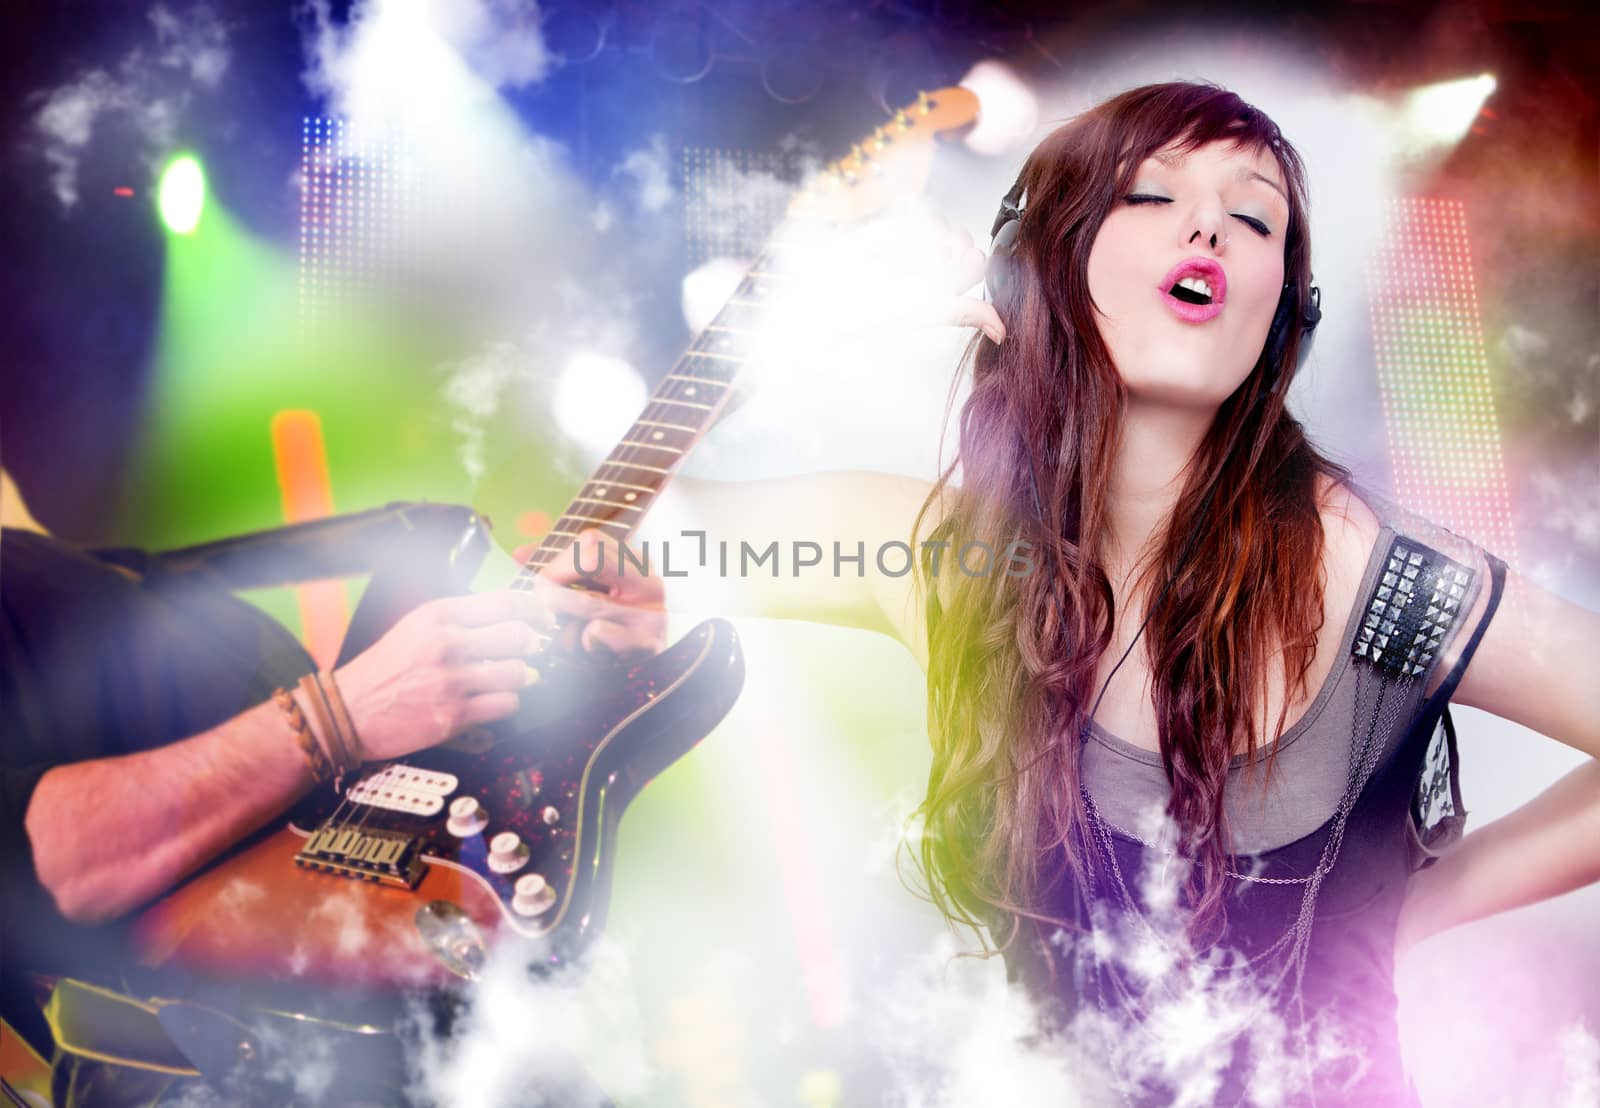 beautiful woman listening to music with headphones and singing. Live music background with guitar and bright lights on stage. Live music and party concept. by Ainat